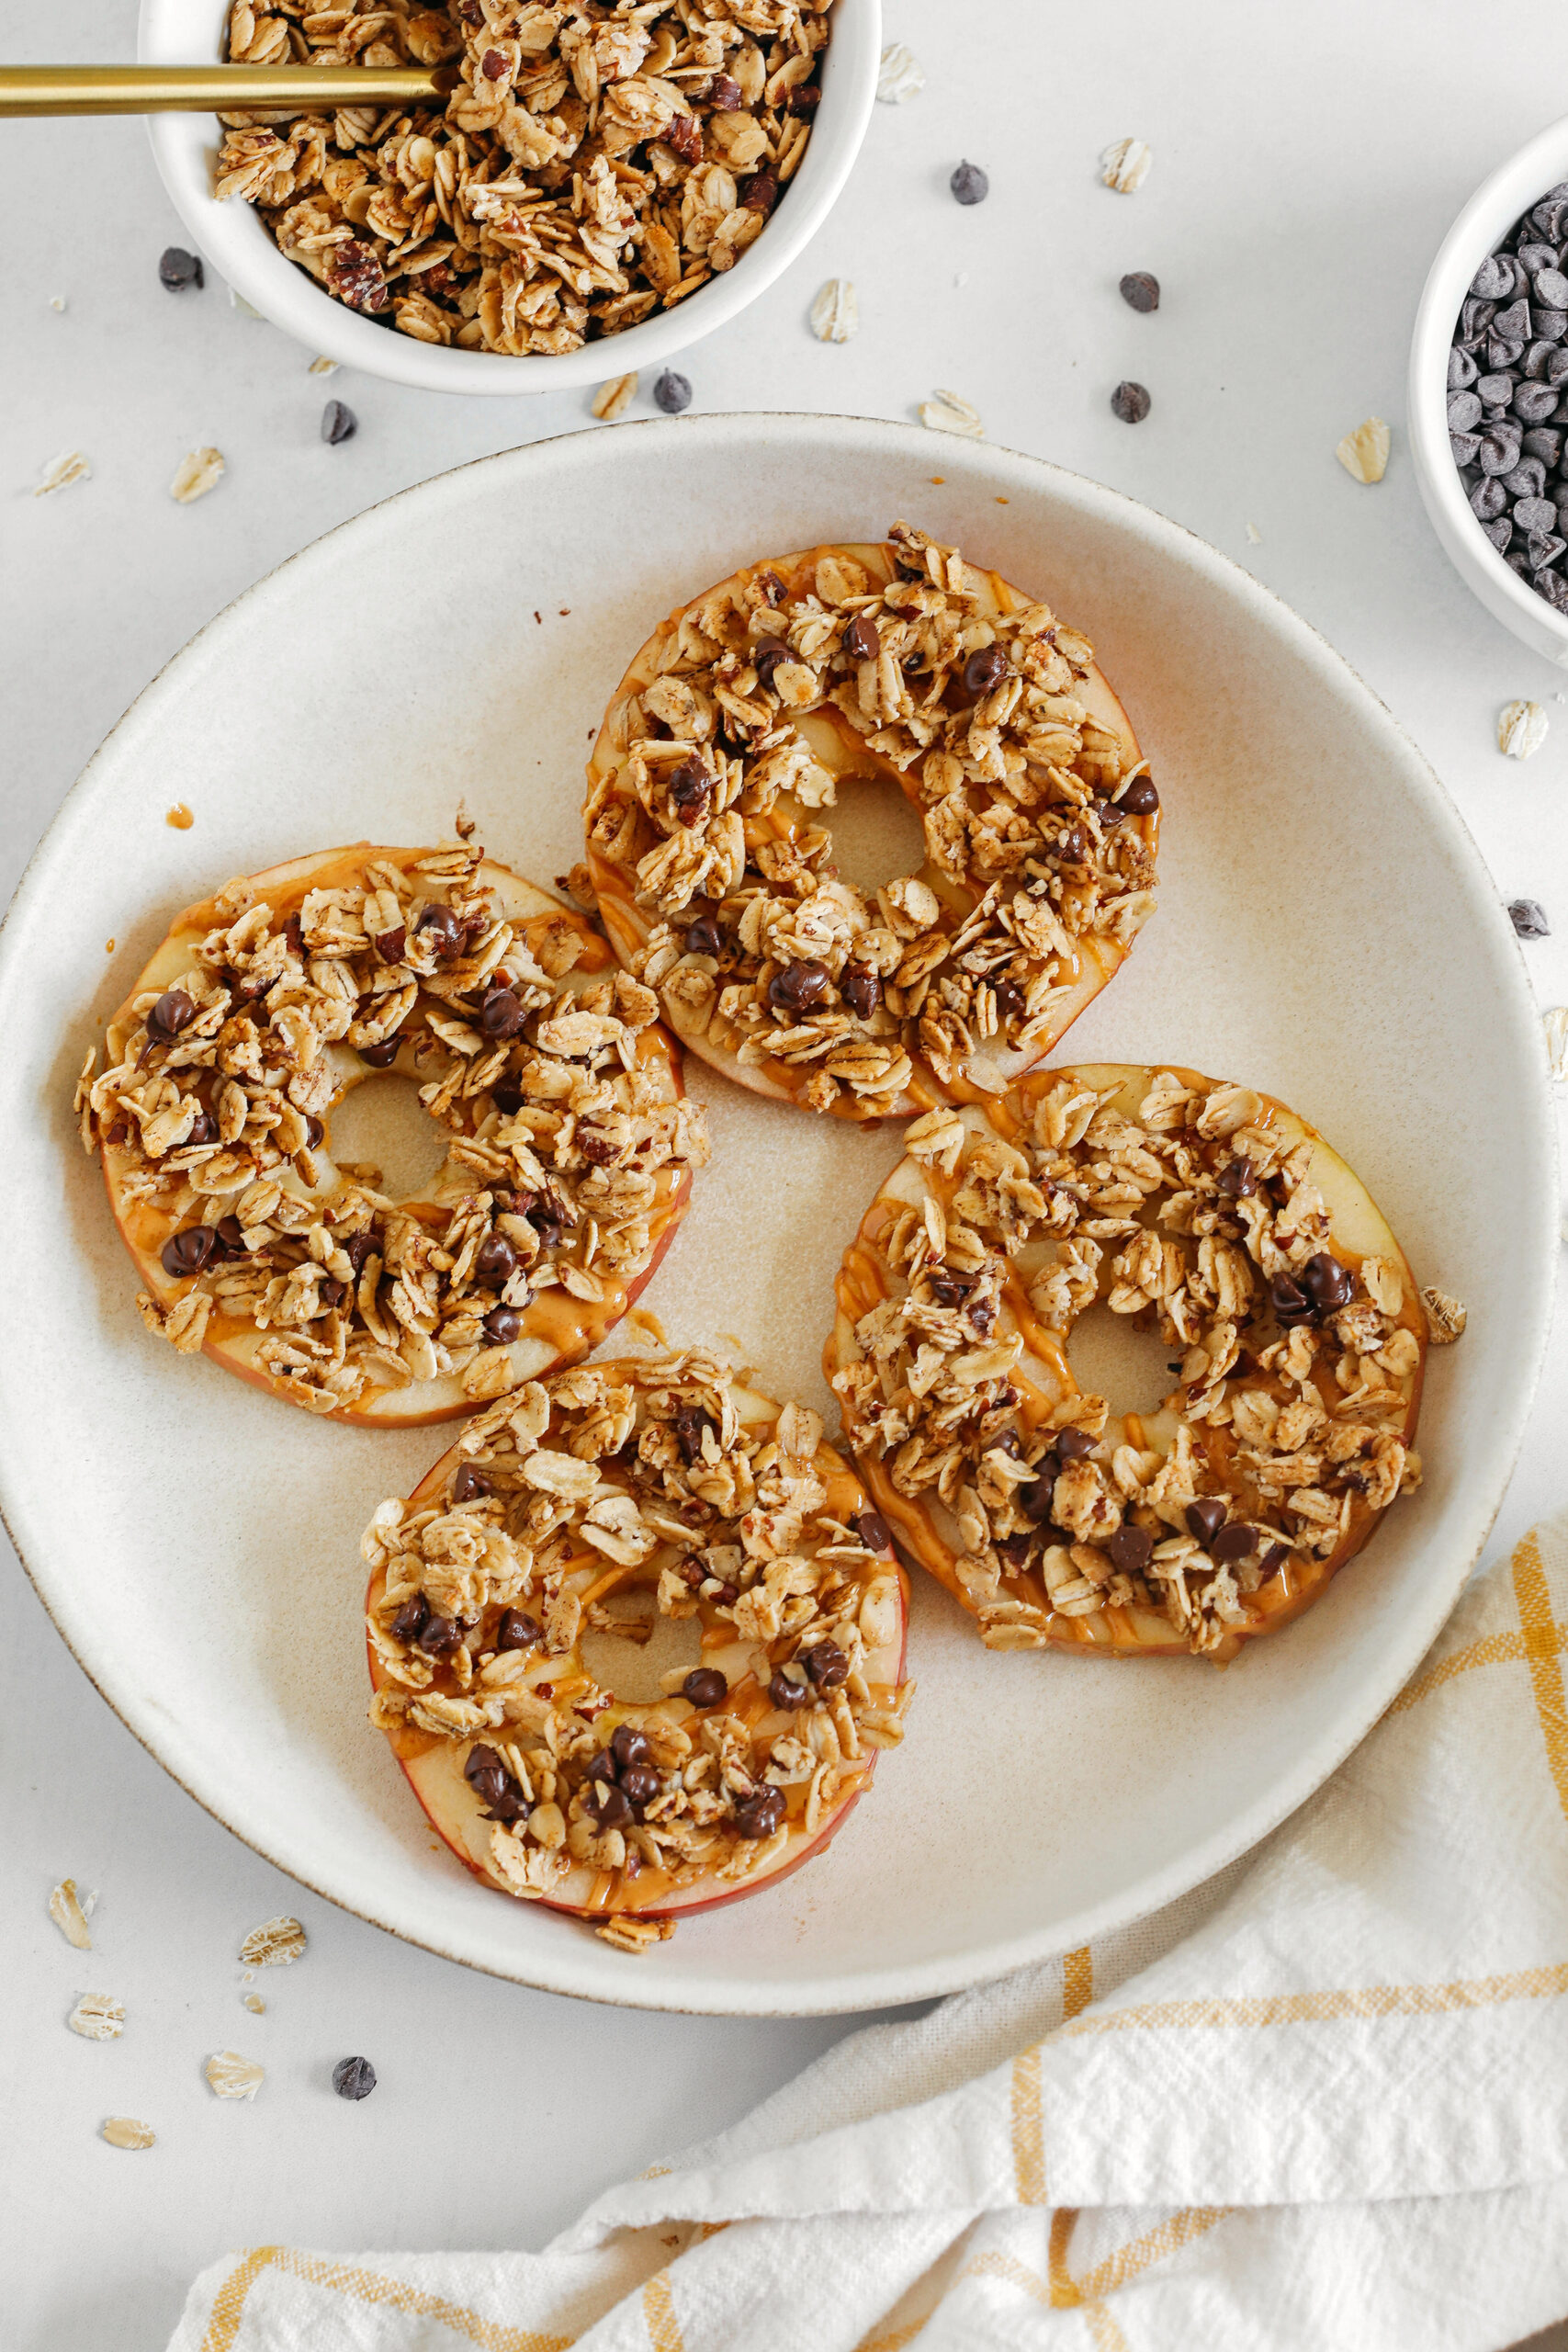 These delicious Peanut Butter Granola Apple Rings make the perfect after-school snack or fun dessert!  Sliced apples drizzled with drippy peanut butter and sprinkled with homemade cinnamon pecan granola studded with chocolate chips!